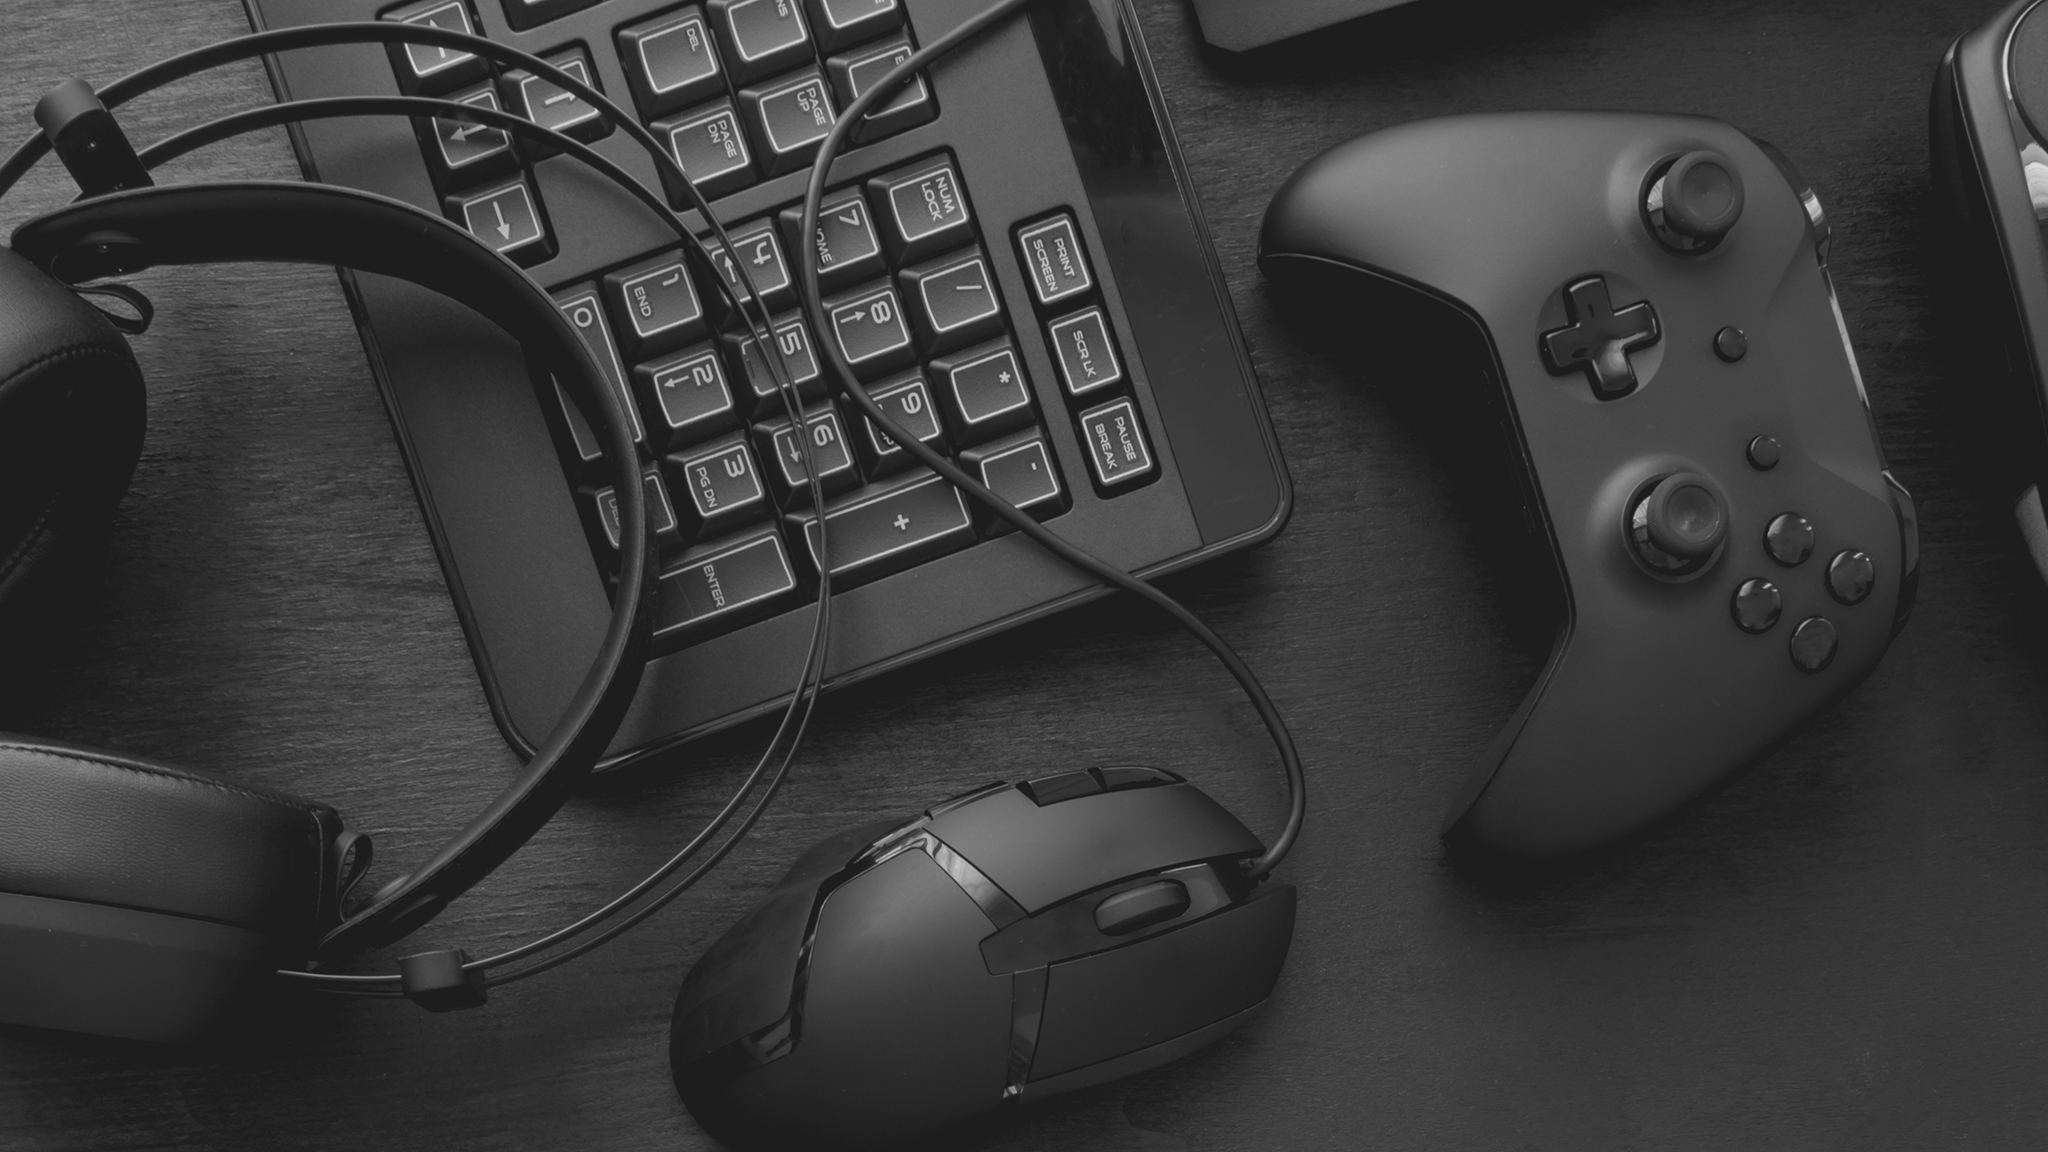 Xbox One Keyboard And Mouse Support Feature Launches Next Week